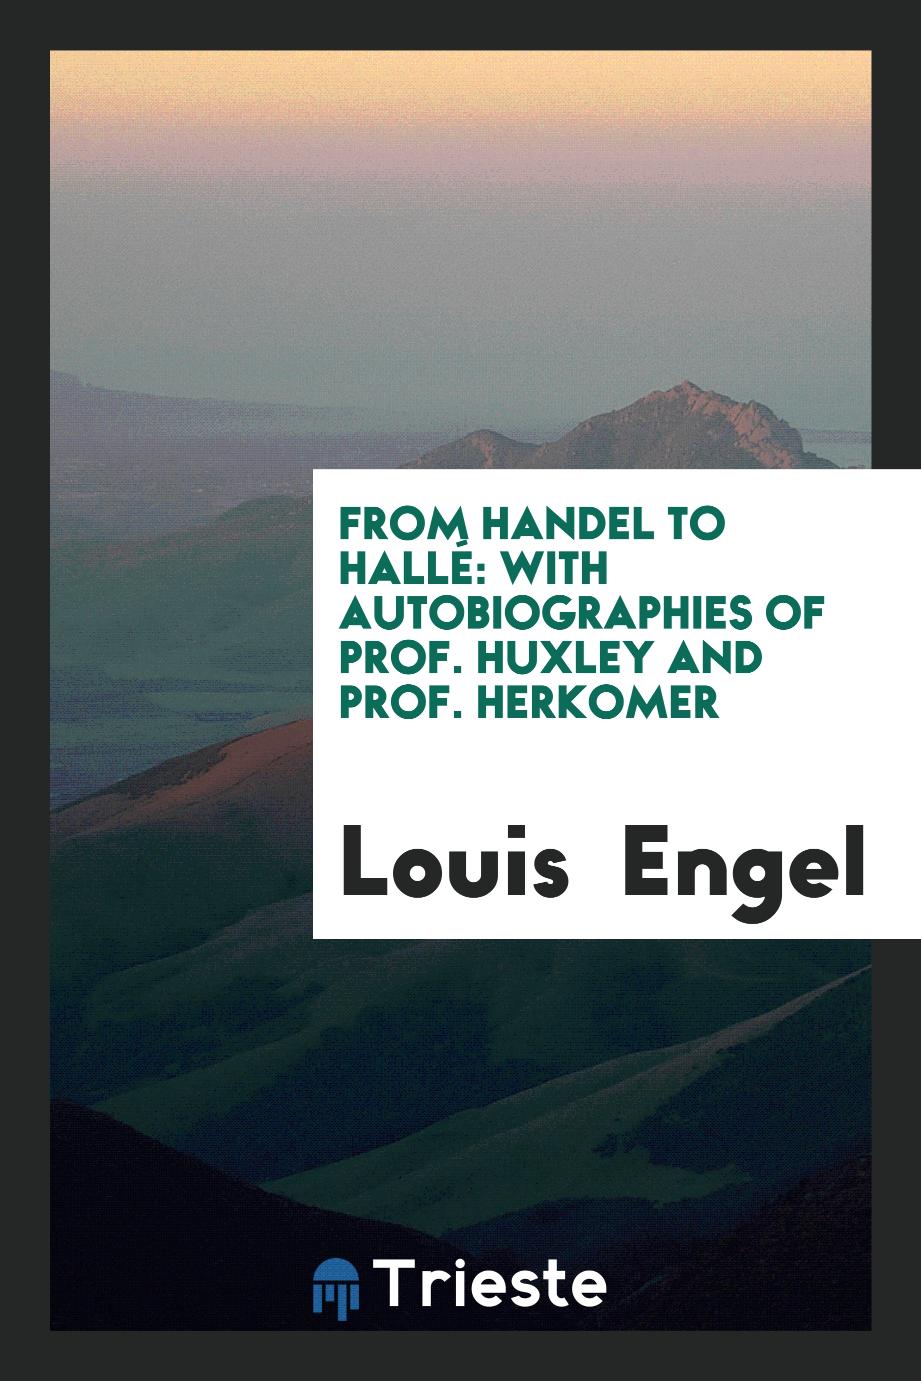 From Handel to Hallé: With Autobiographies of Prof. Huxley and Prof. Herkomer